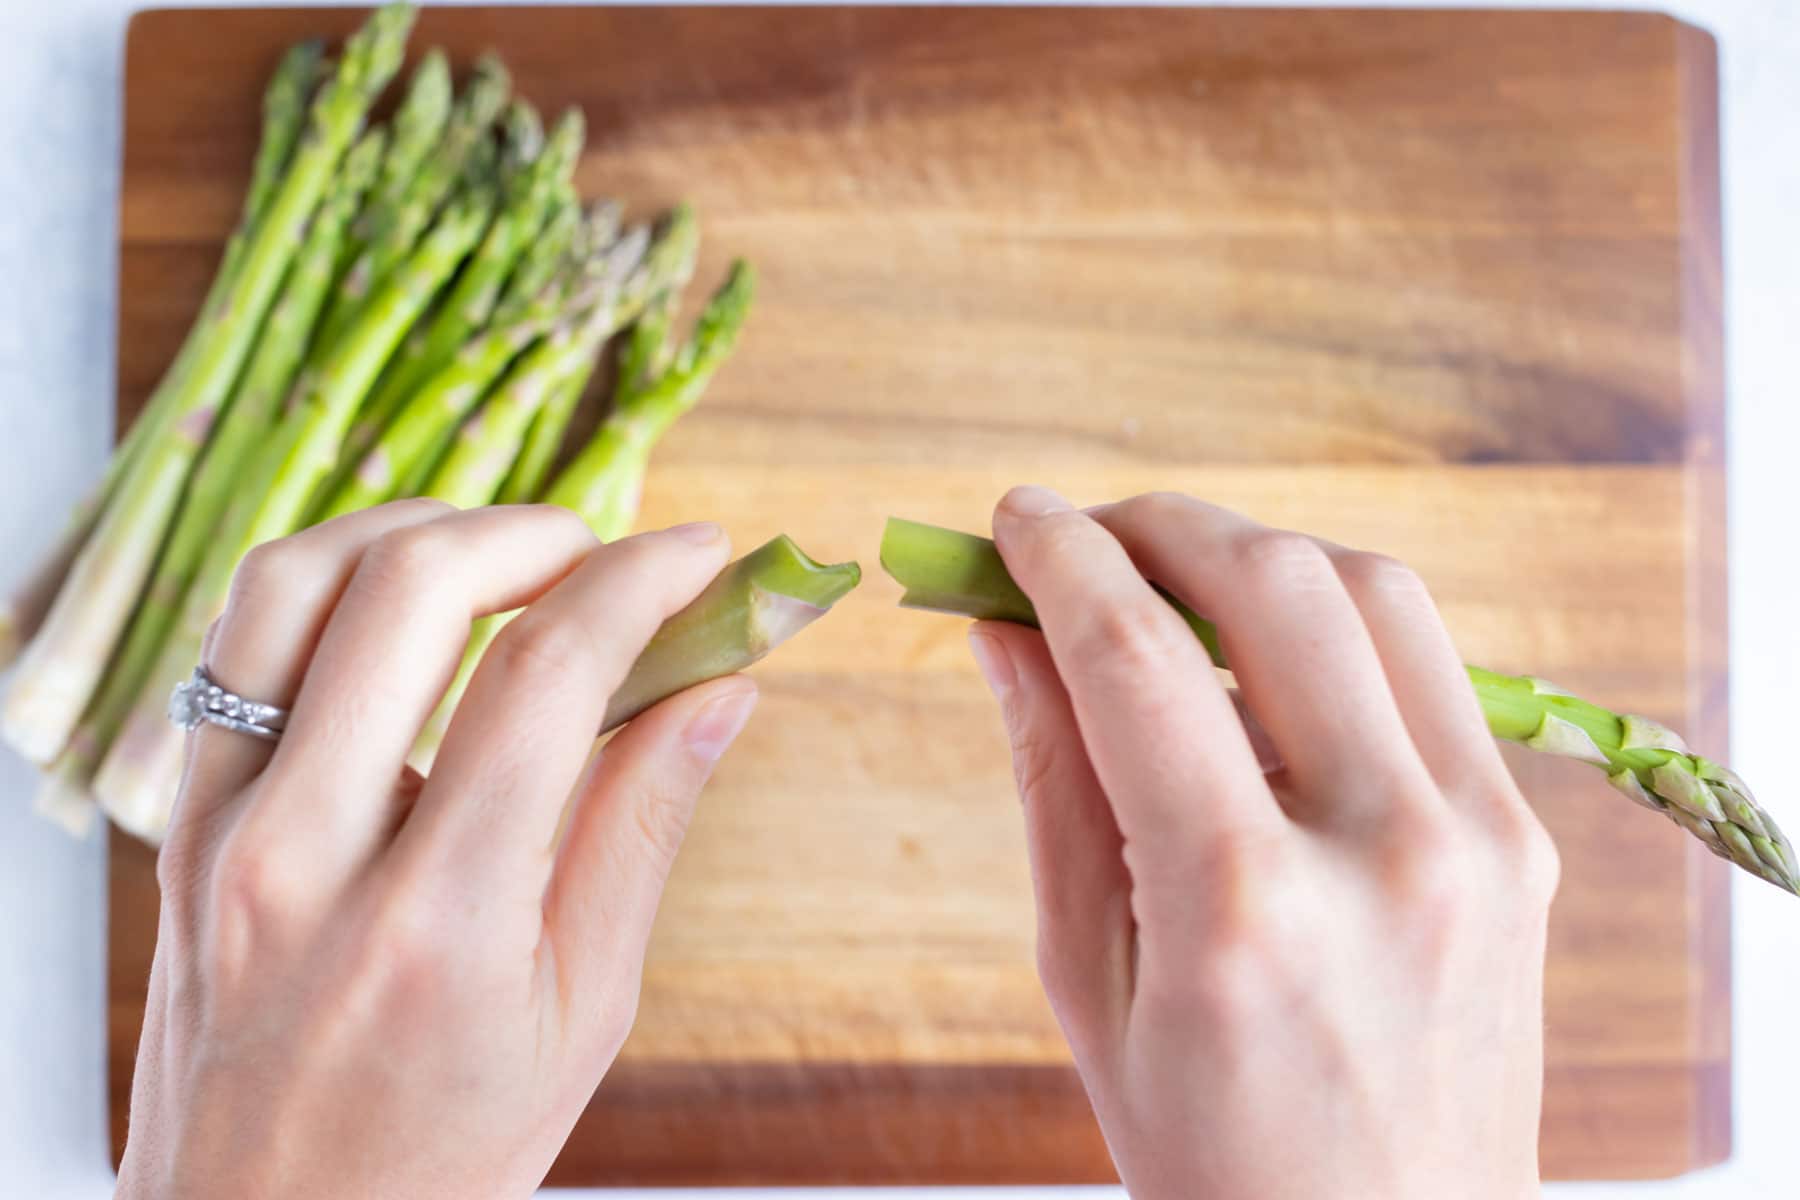 Asparagus ends are snapped off with your hands.